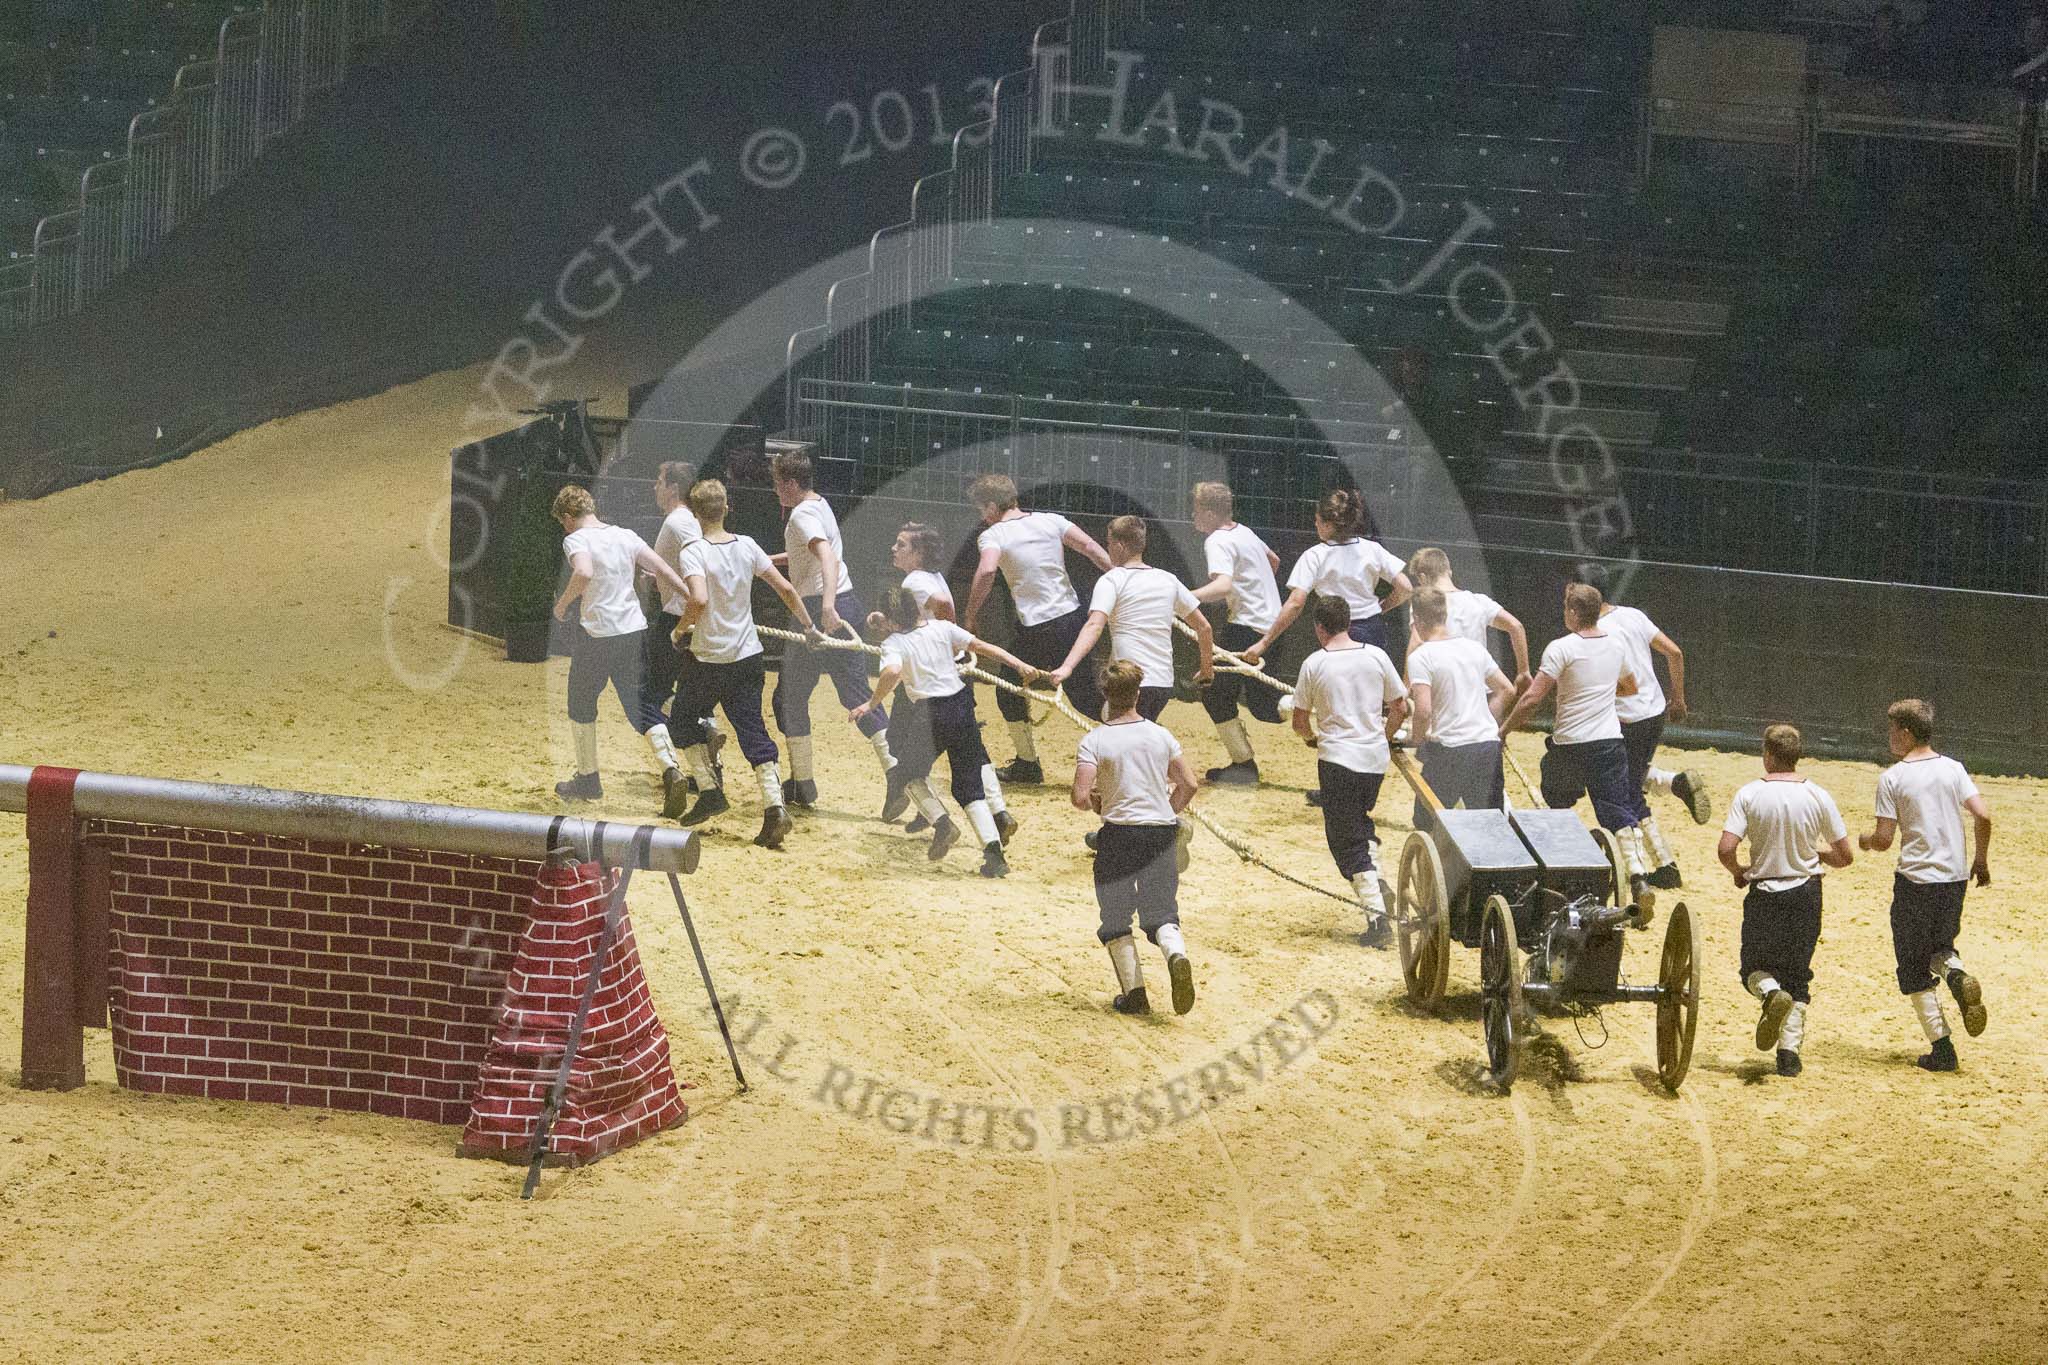 British Military Tournament 2013.
Earls Court,
London SW5,

United Kingdom,
on 06 December 2013 at 16:11, image #332